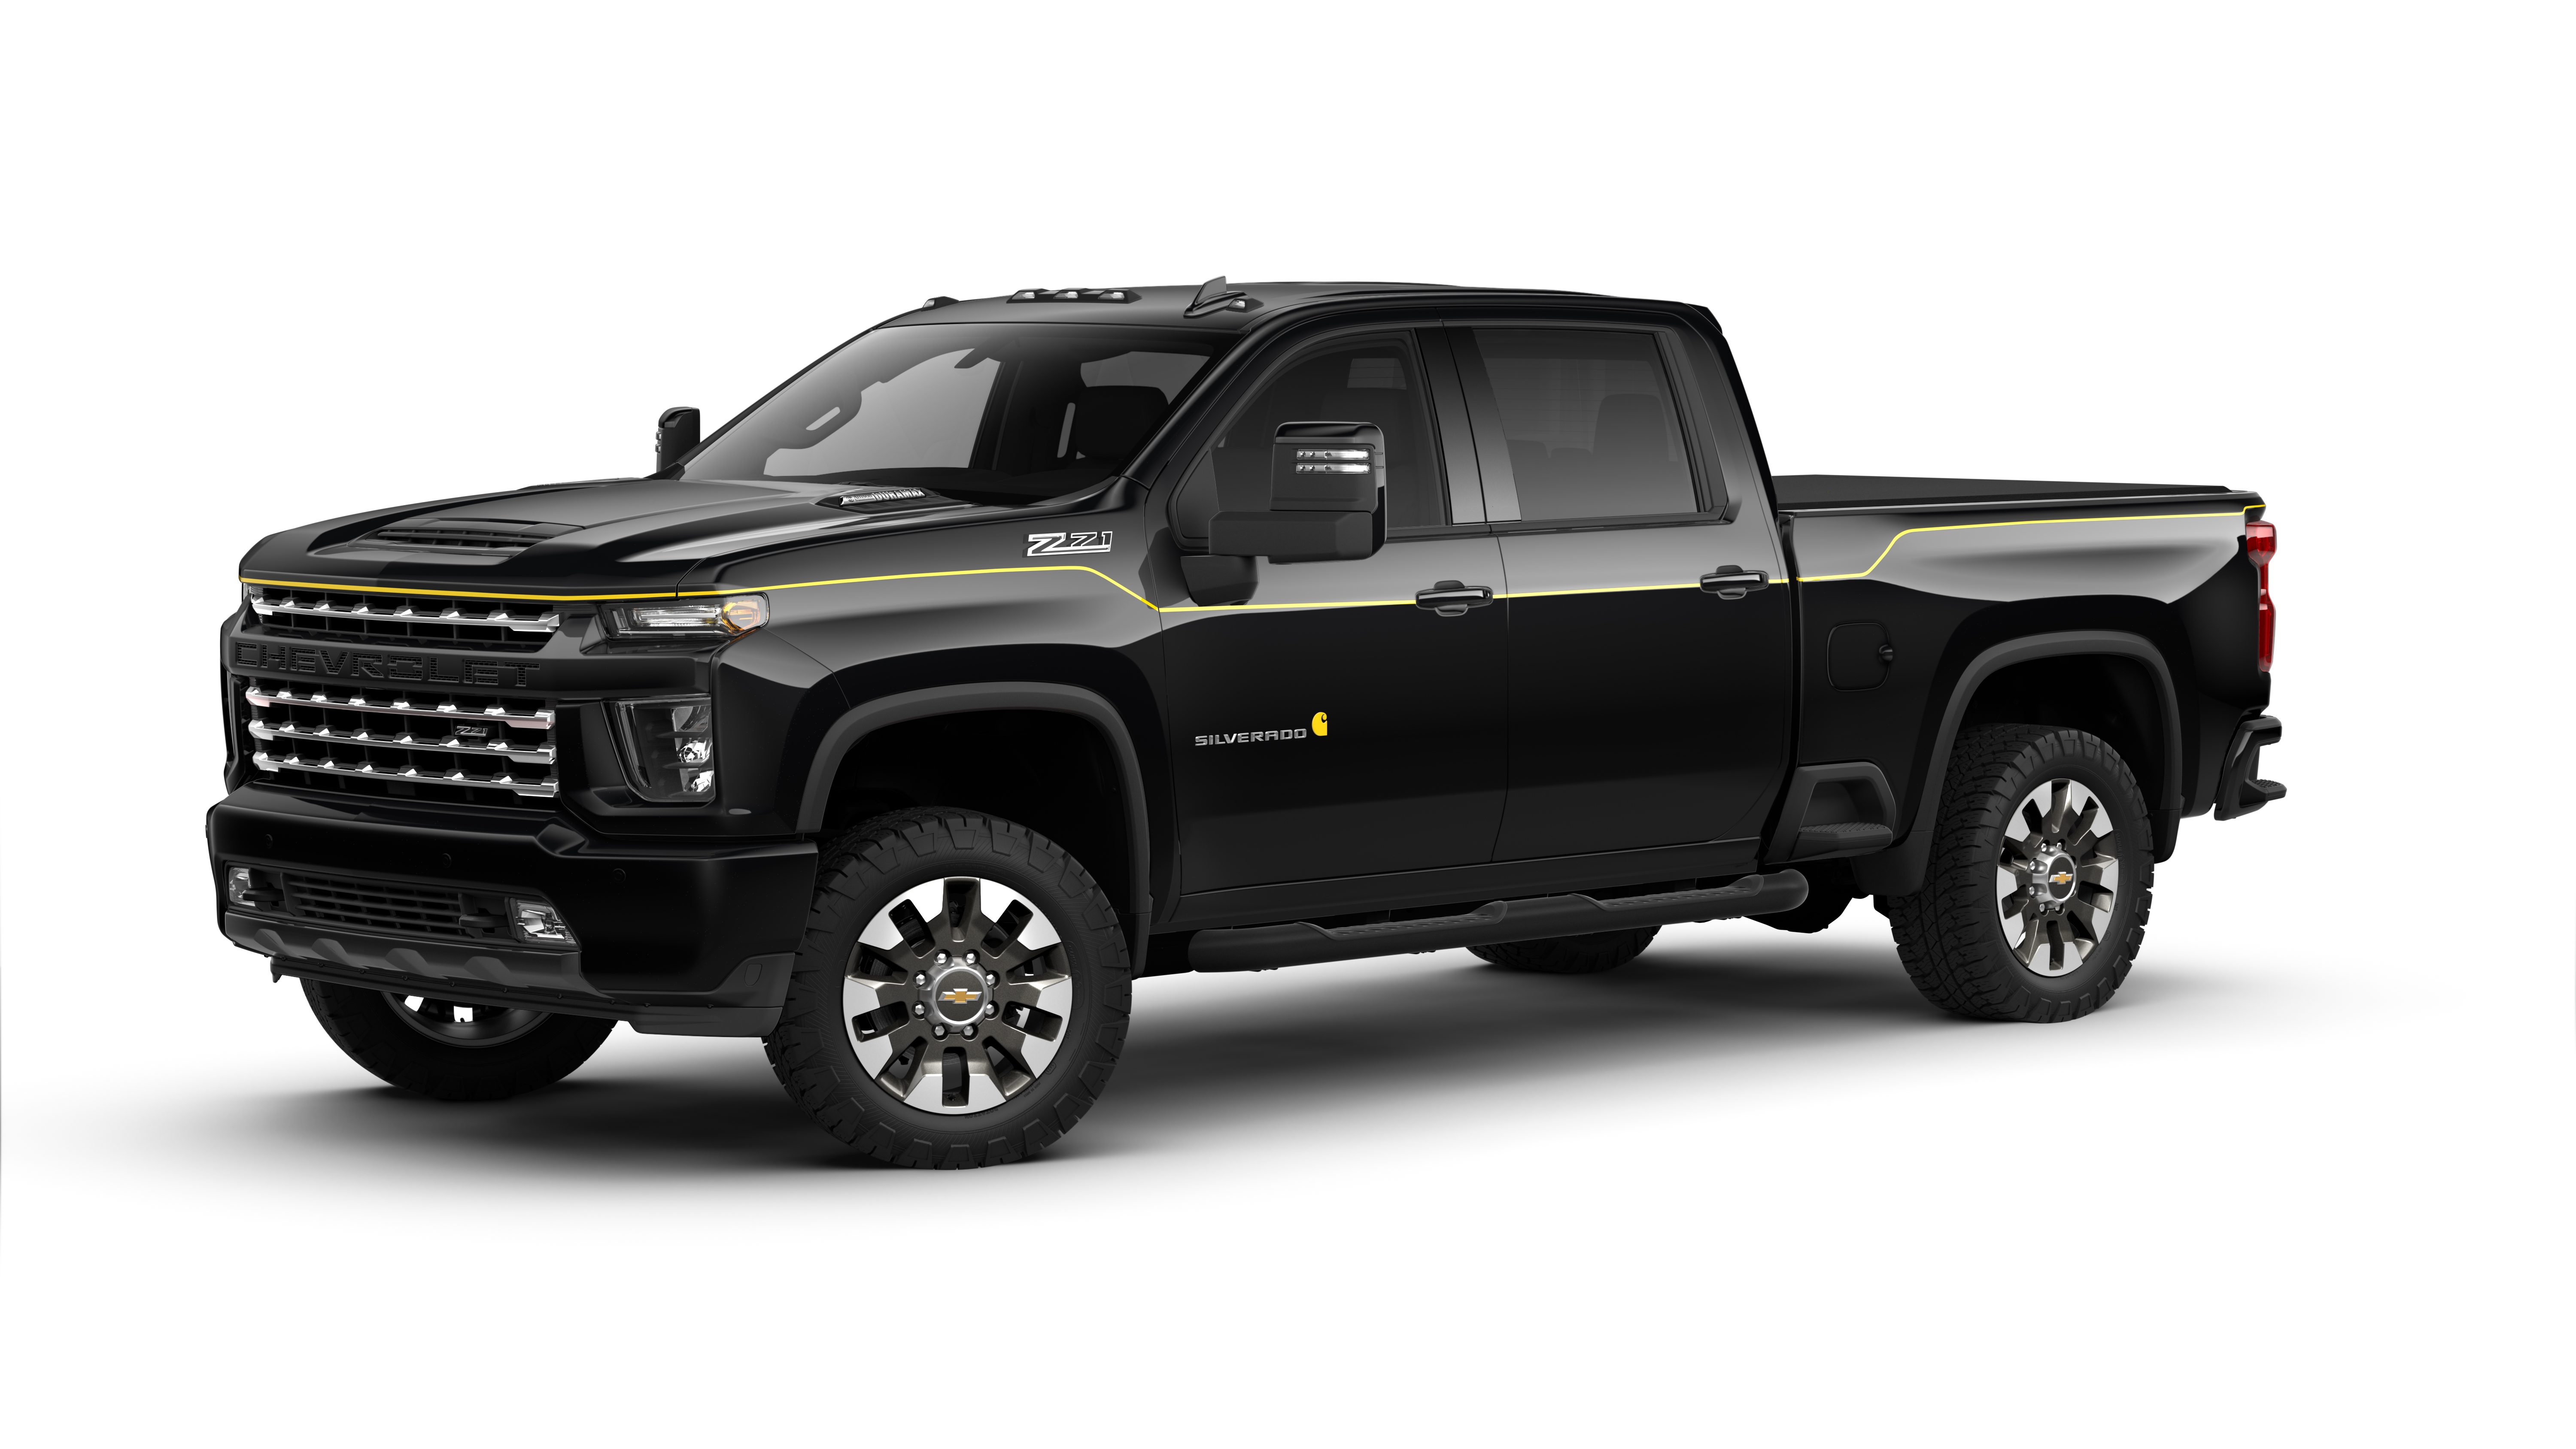 2021 Chevrolet Silverado HD Receives Host of Updates and Will Offer up to  36,000 Pounds of Max Towing